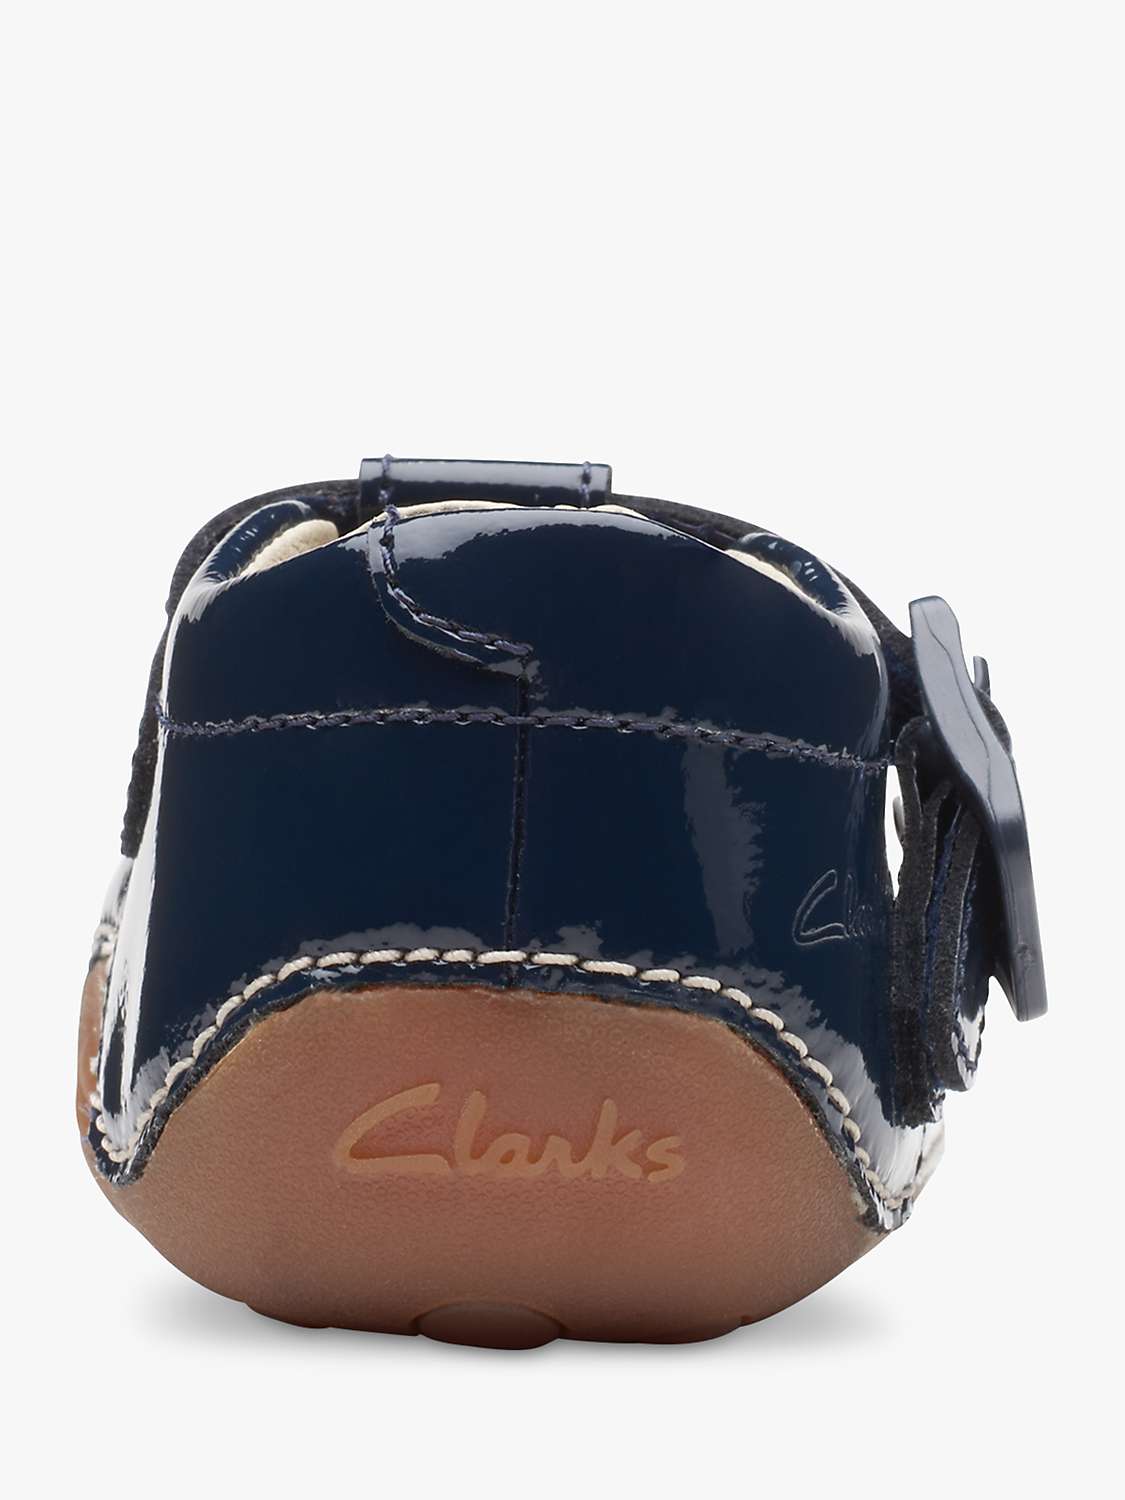 Buy Clarks Baby Tiny Beat Leather Pre-Walker Shoes, Navy Online at johnlewis.com